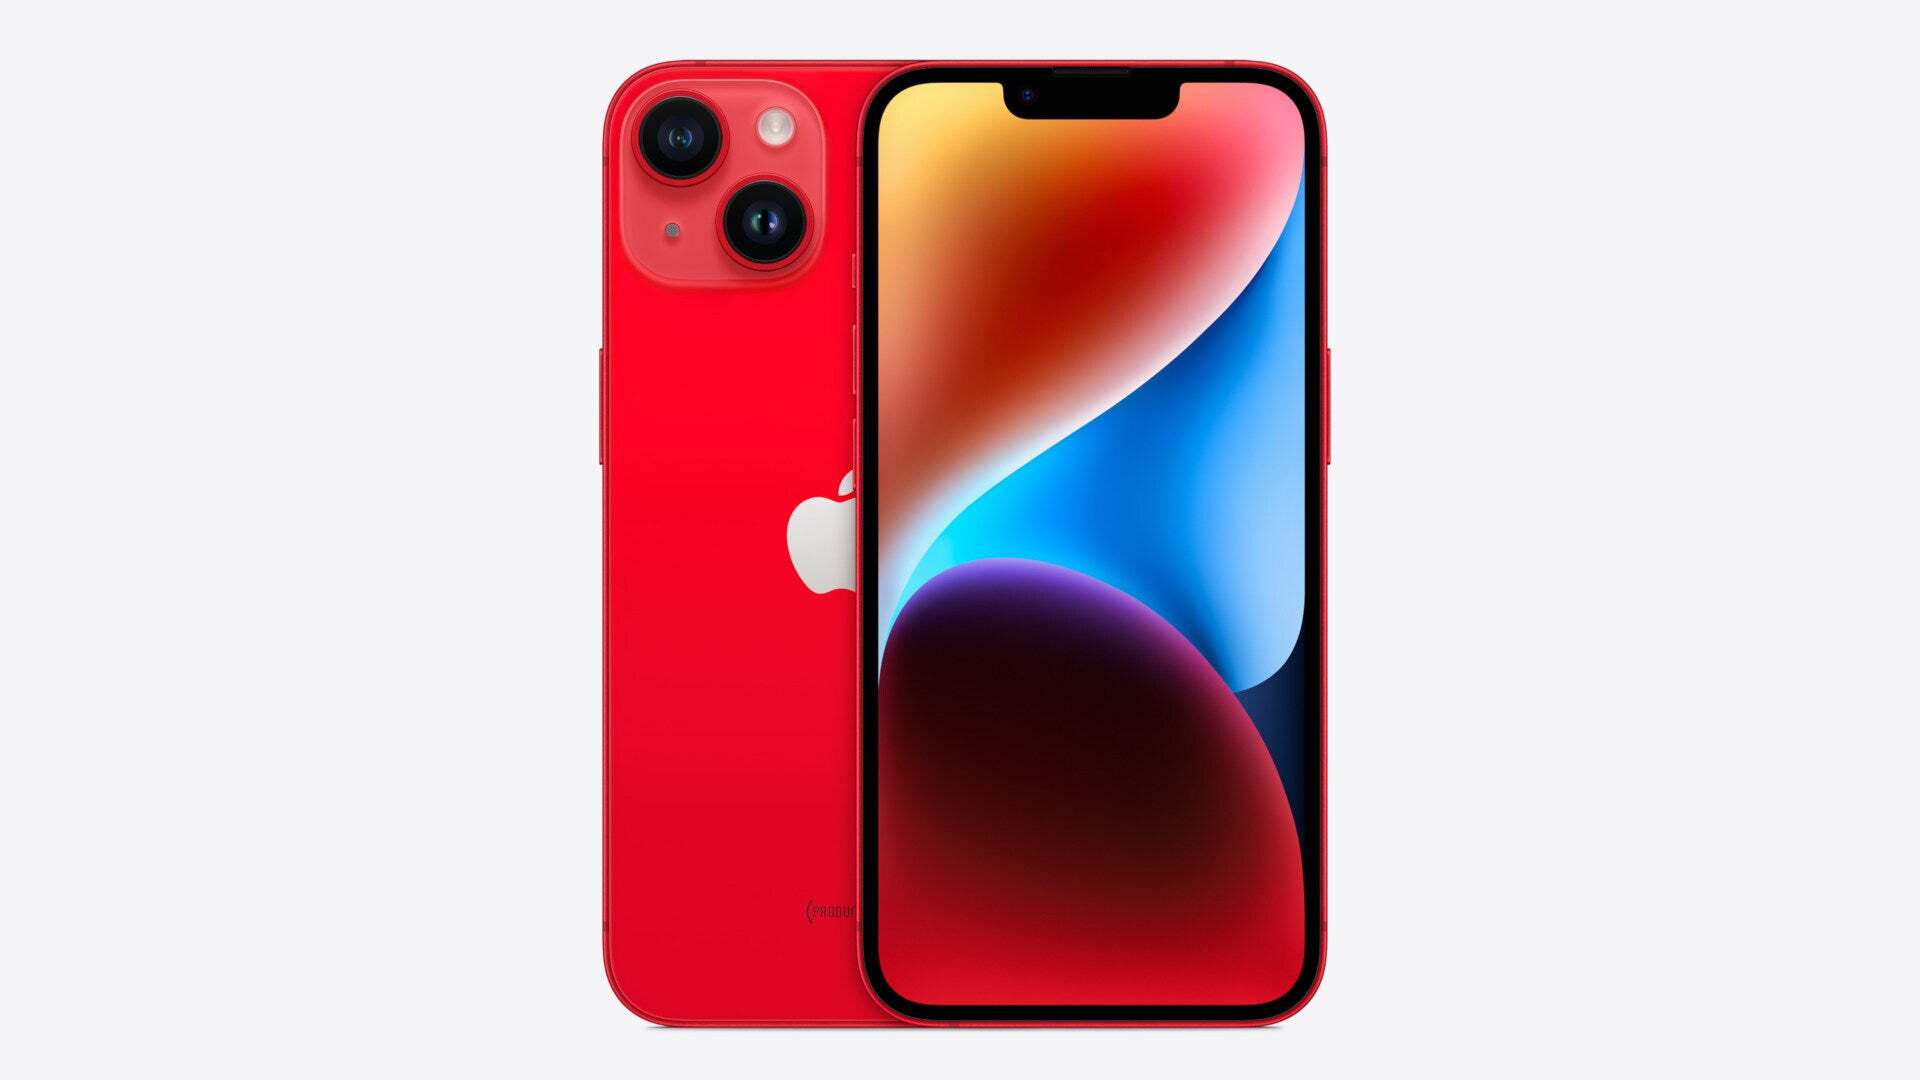 The iPhone 14 showcasing the Product RED color (Image Source - Apple) - iPhone 16 colors: all the rumored shades